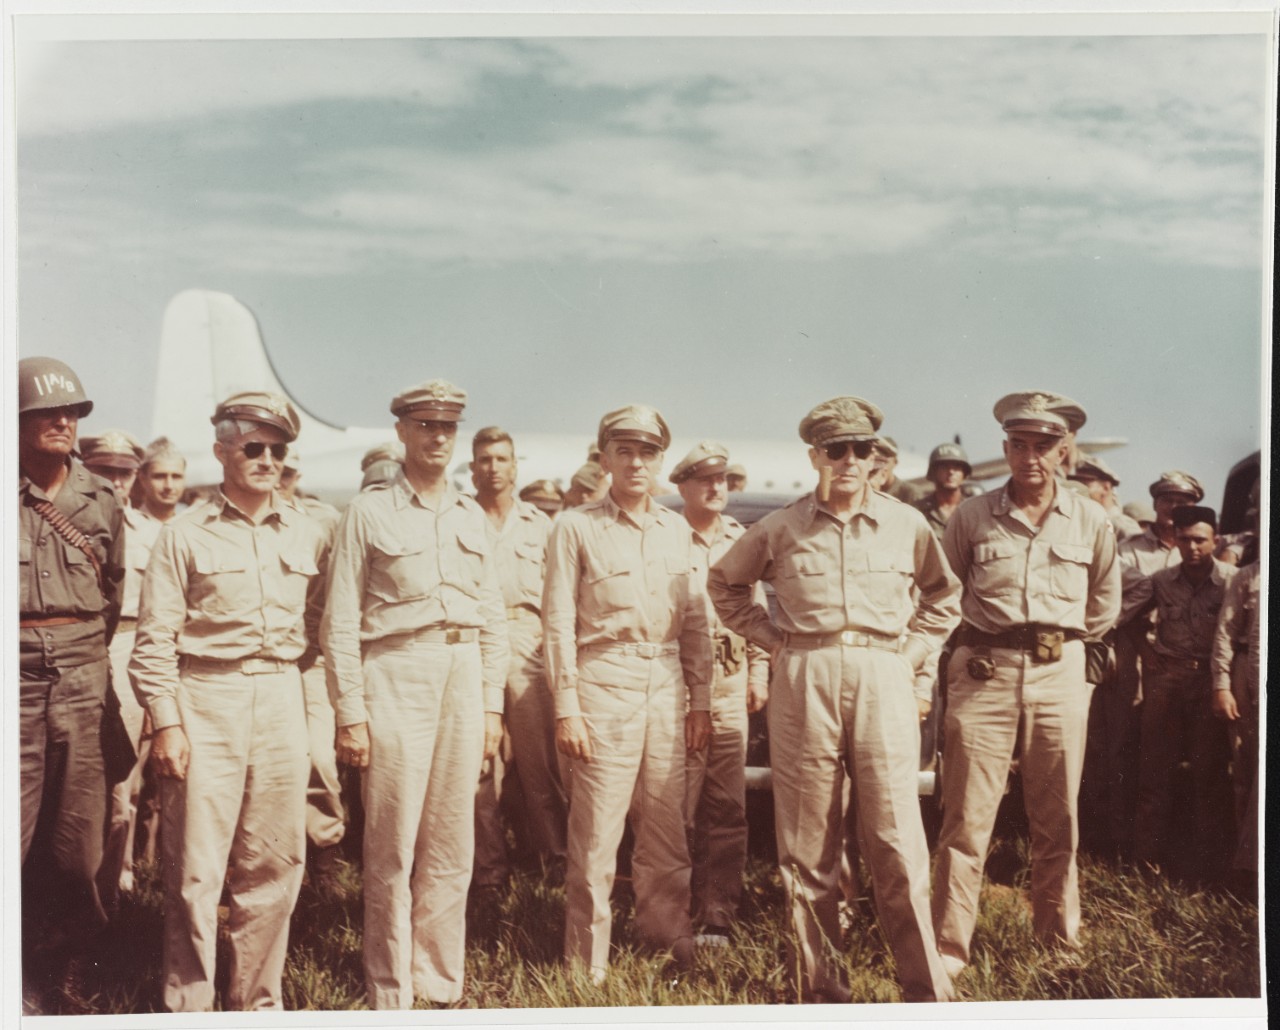 Photo #: USA C-1732 General of the Army Douglas MacArthur, U.S. Army (second from right)  